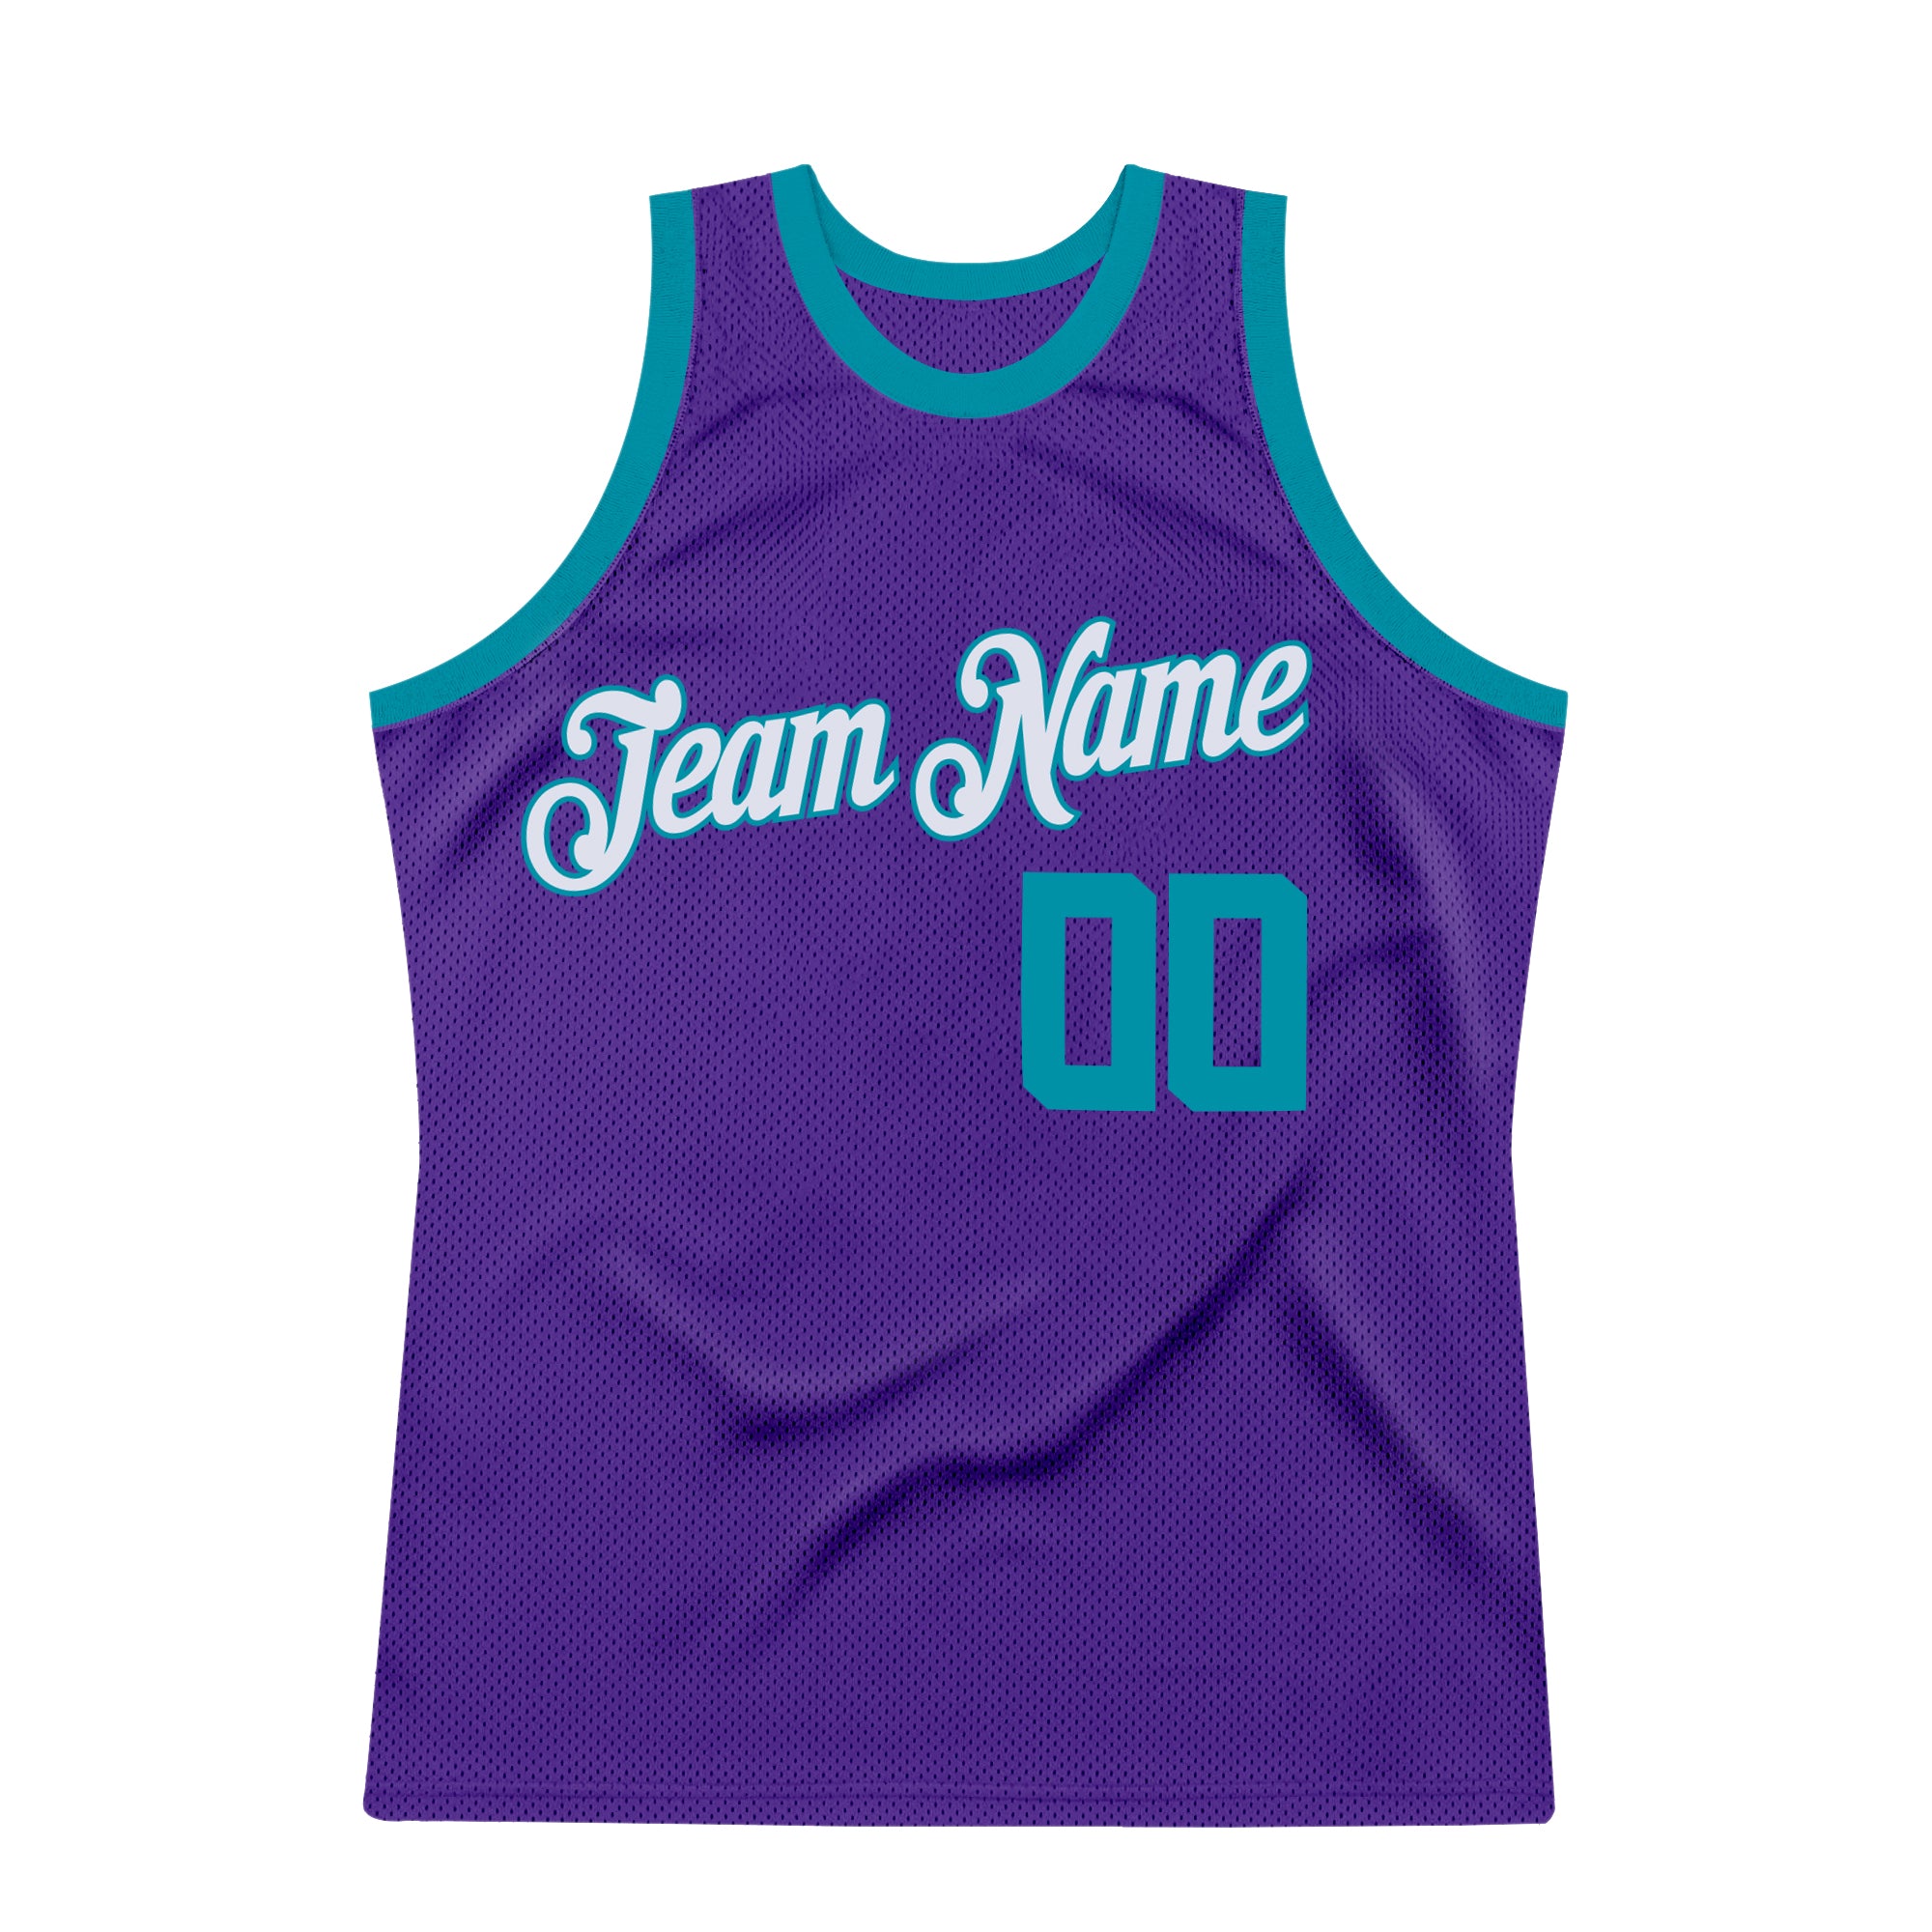 Custom White Purple Pinstripe Purple-Gold Authentic Throwback Basketball  Jersey Discount